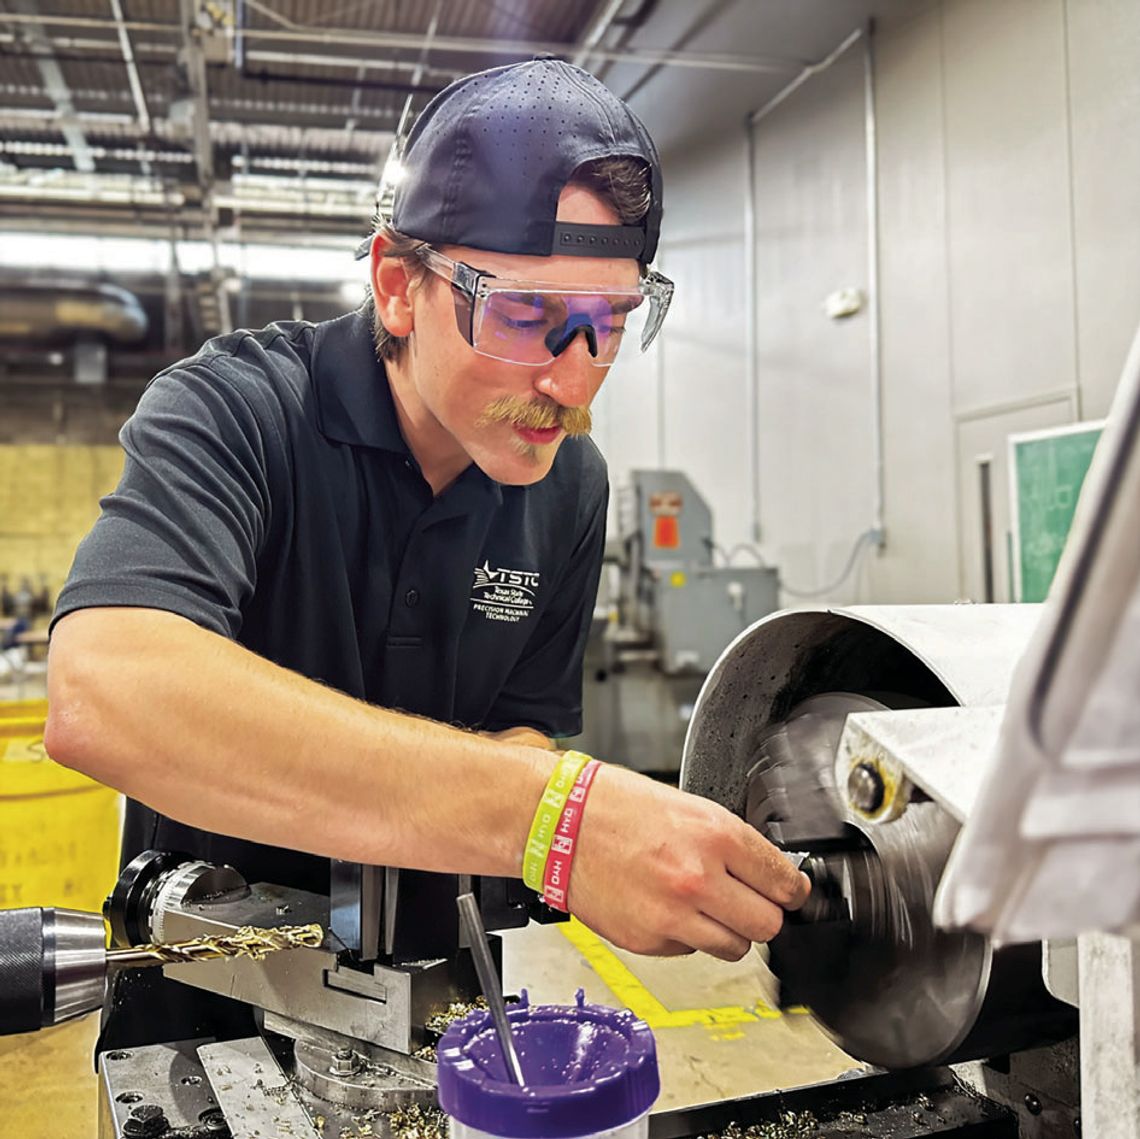 Machining student from Boerne fine-tunes career plans at TSTC at Waco